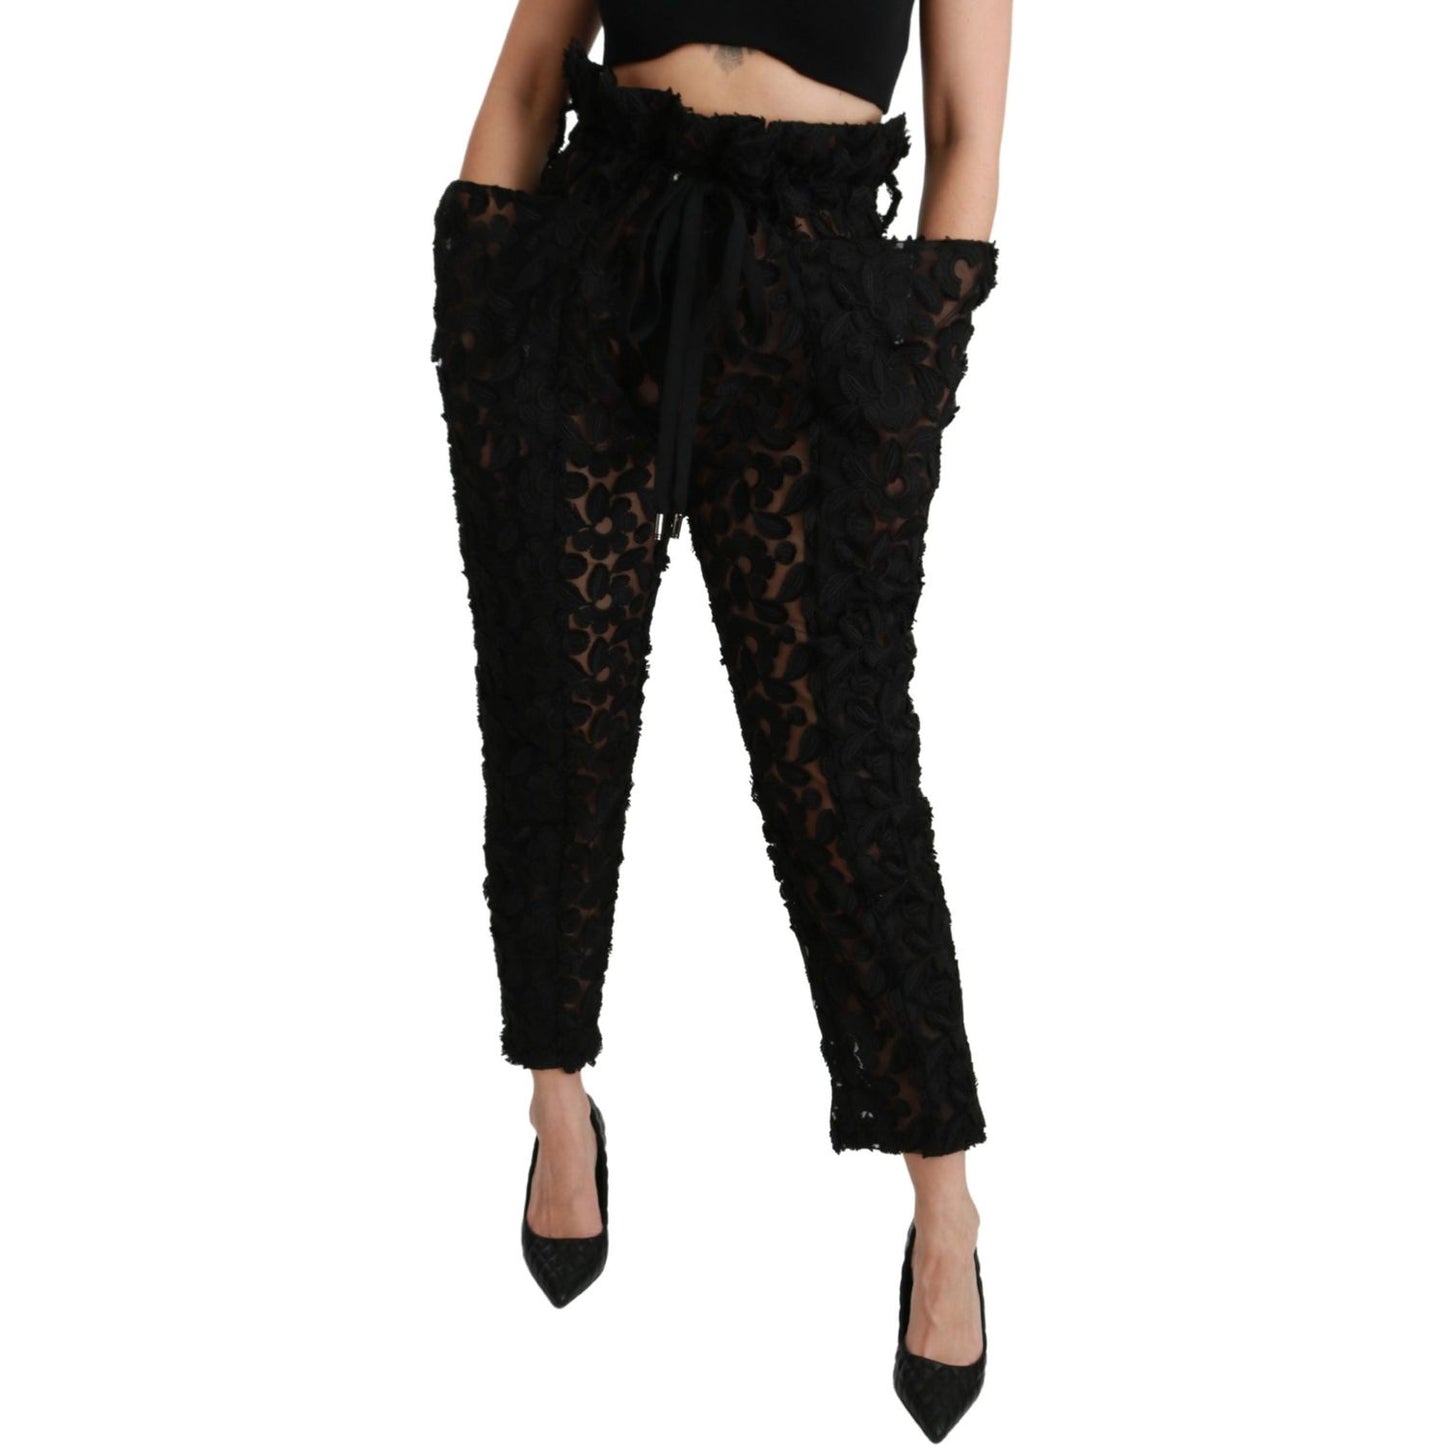 Dolce & Gabbana Chic Tapered High Waist Lace Pants Jeans & Pants black-floral-lace-tapered-high-waist-pants